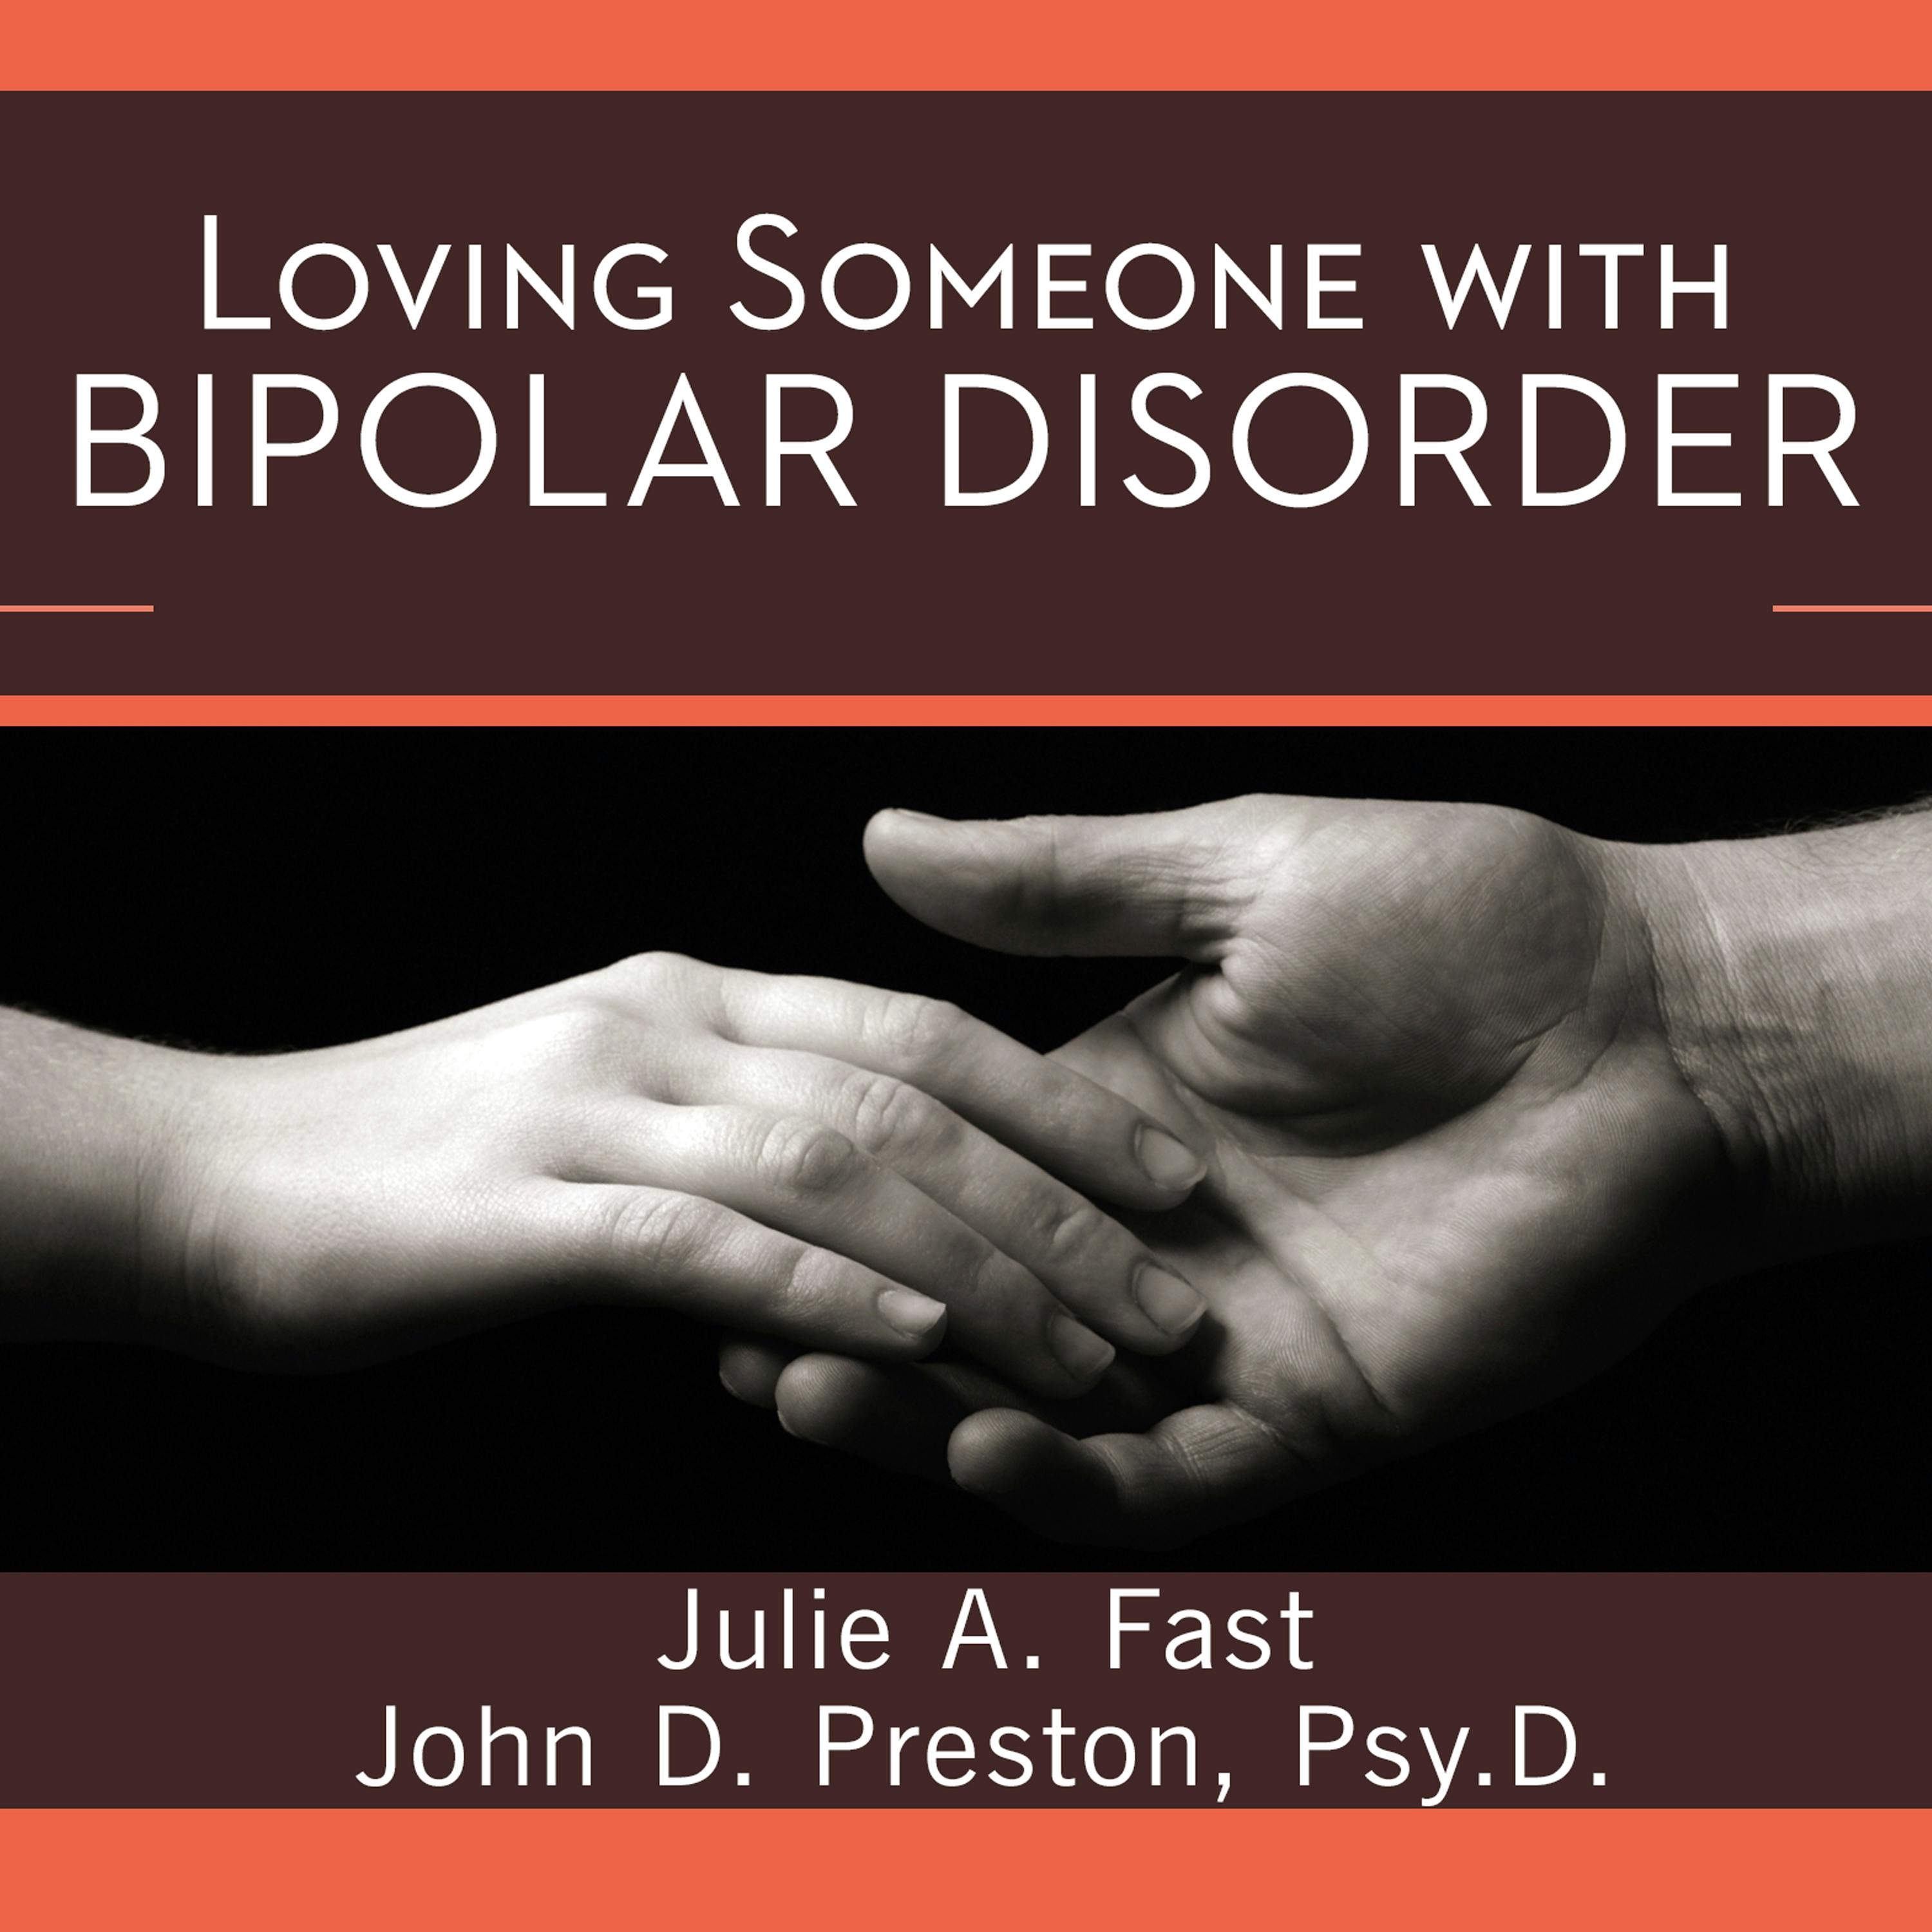 Loving Someone with Bipolar Disorder: Understanding and Helping Your Partner - Julie A. Fast, Psy.D.